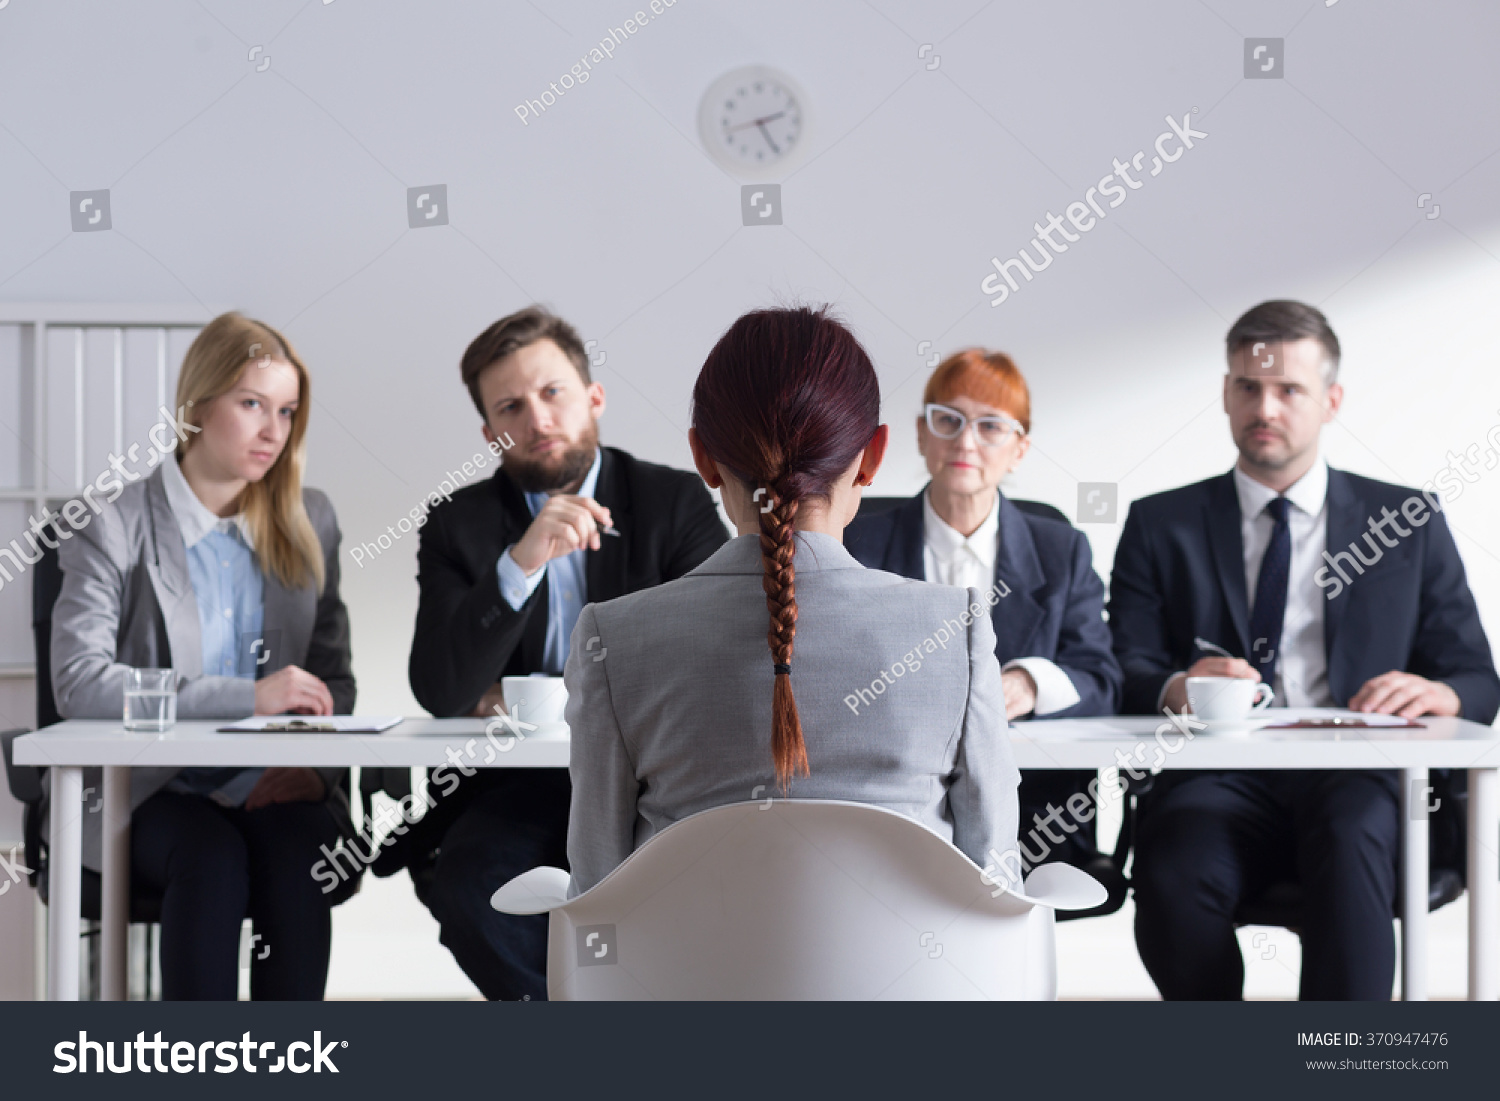 Woman during job interview and four elegant members of management #370947476